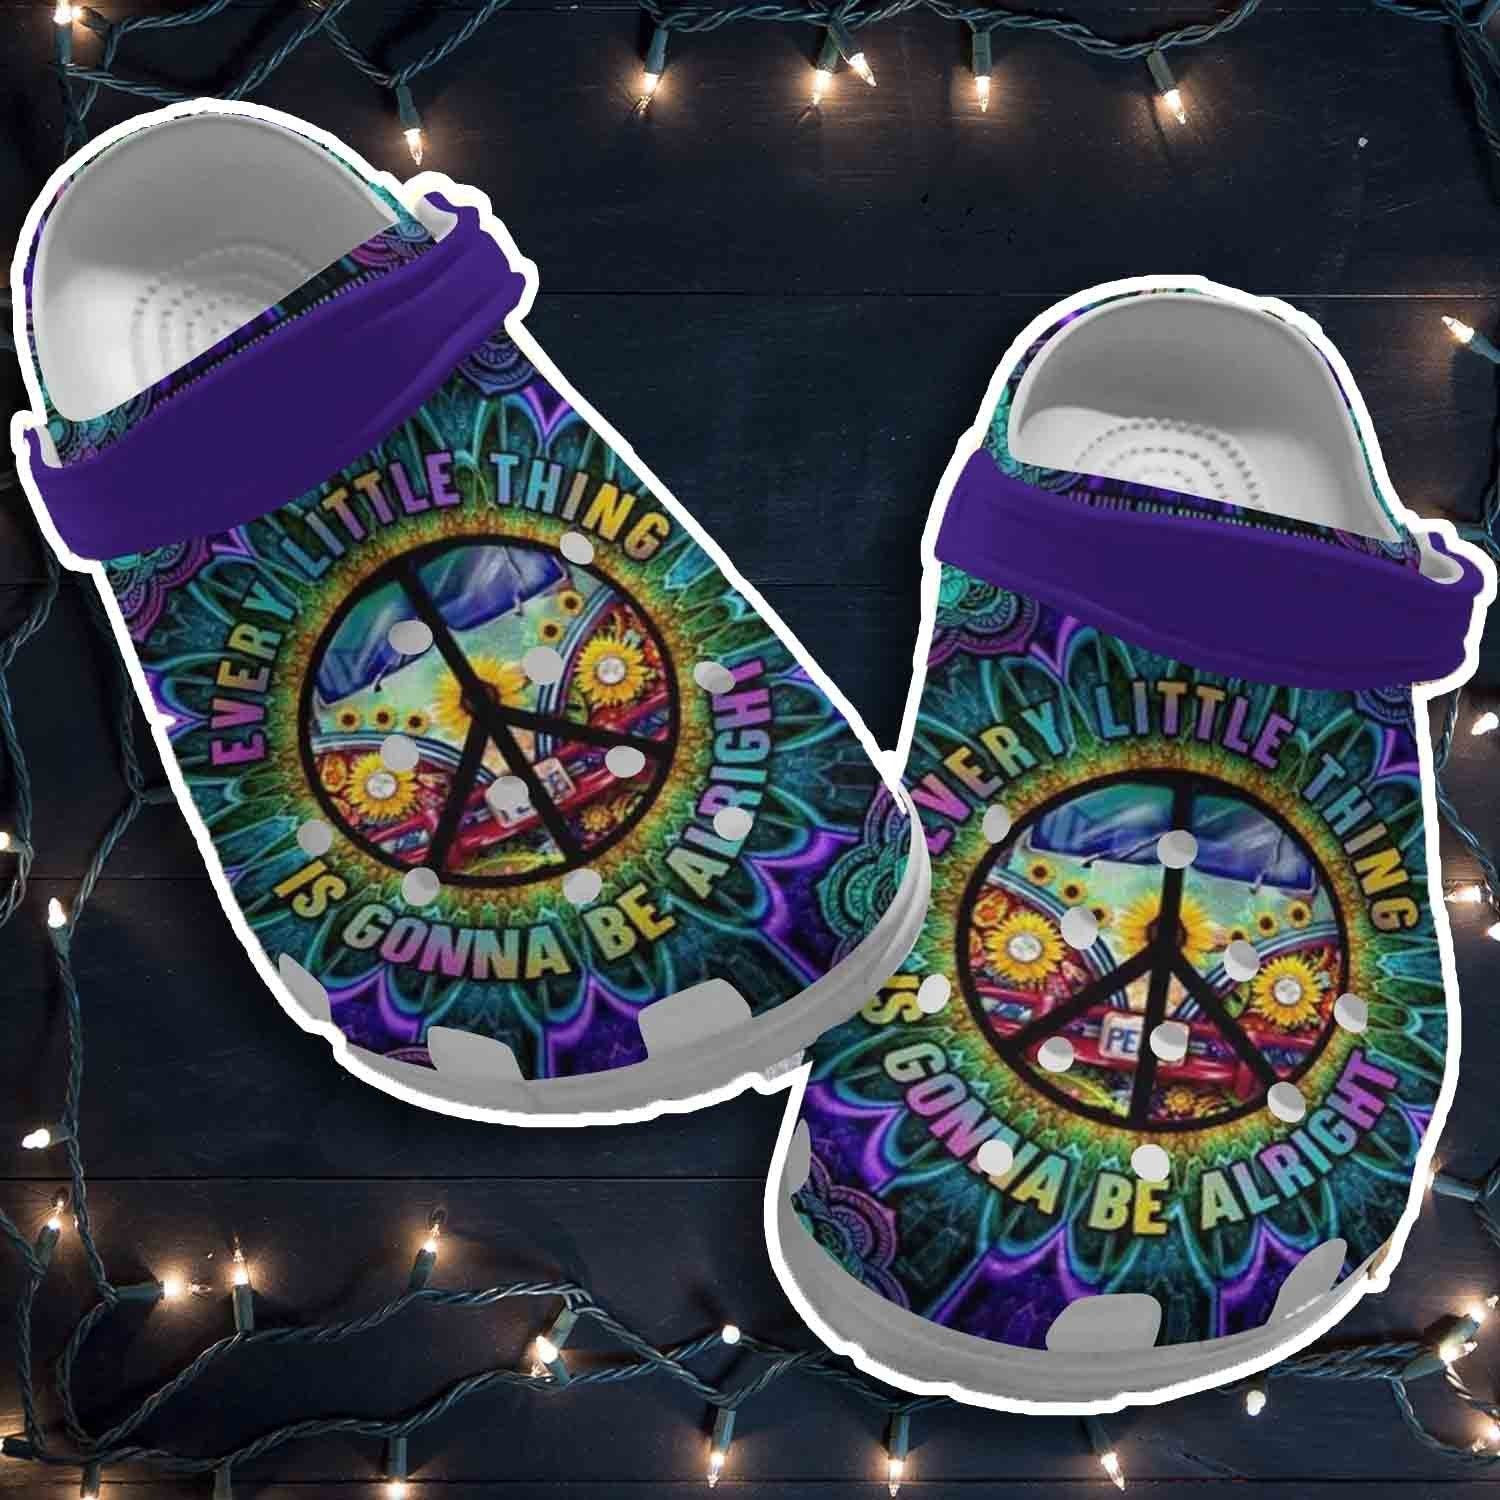 Hippie Bus Collection Crocs Shoes Clogs - Be Alright Crocs Shoes Clogs Gifts For Son Daughter